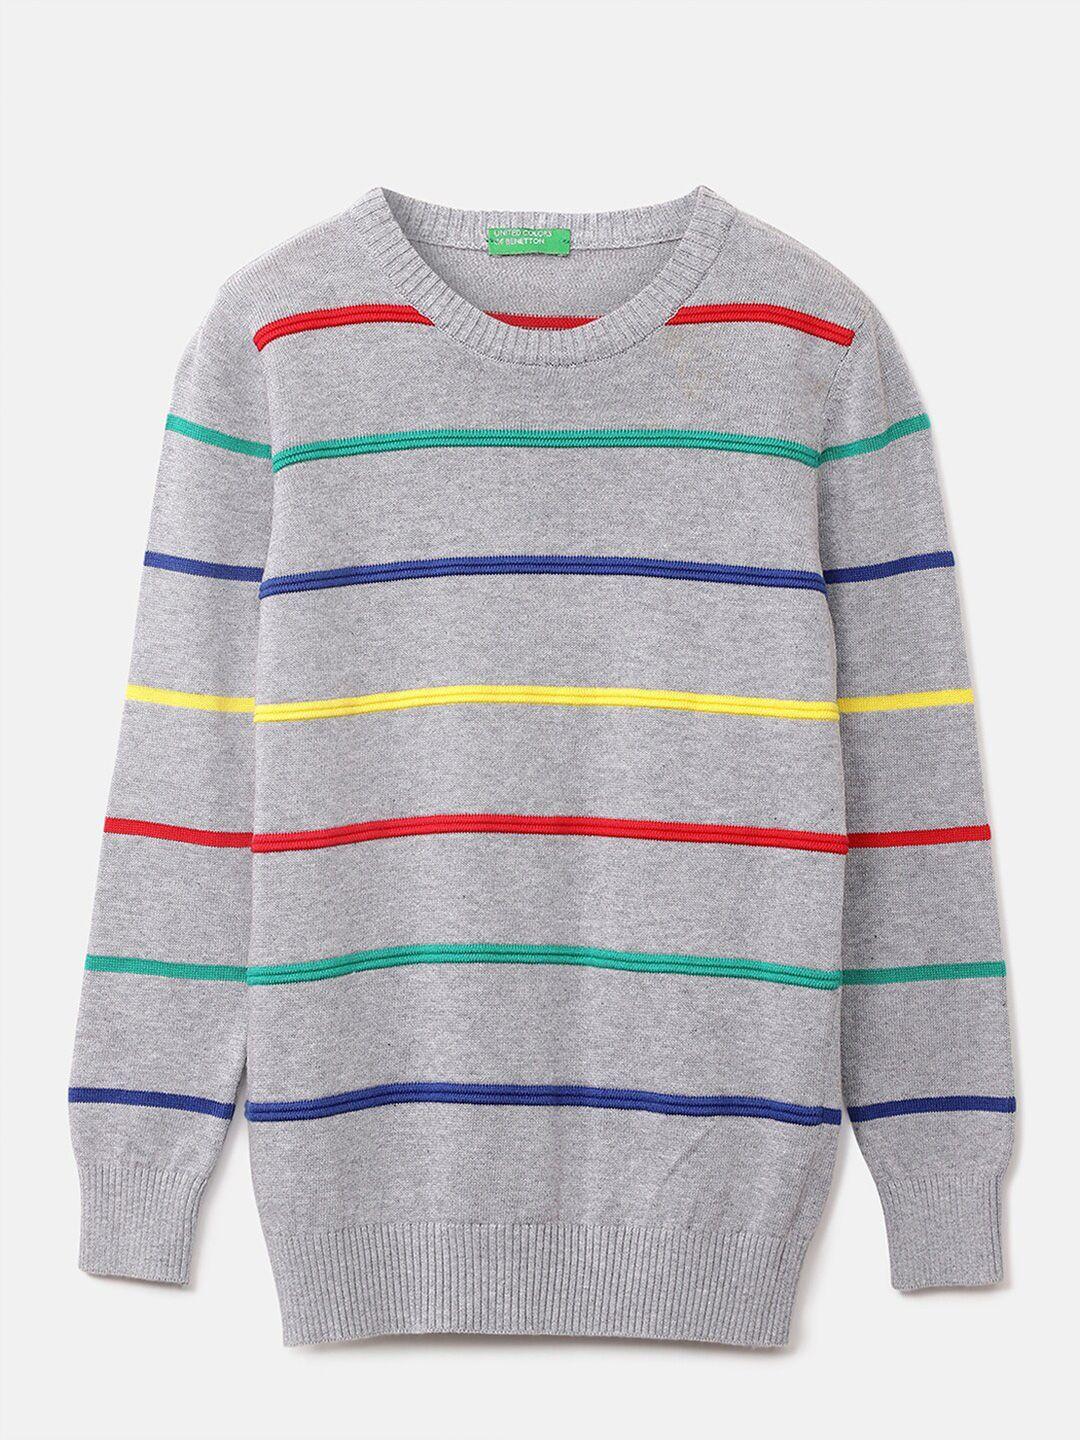 united colors of benetton boys grey & blue striped pullover